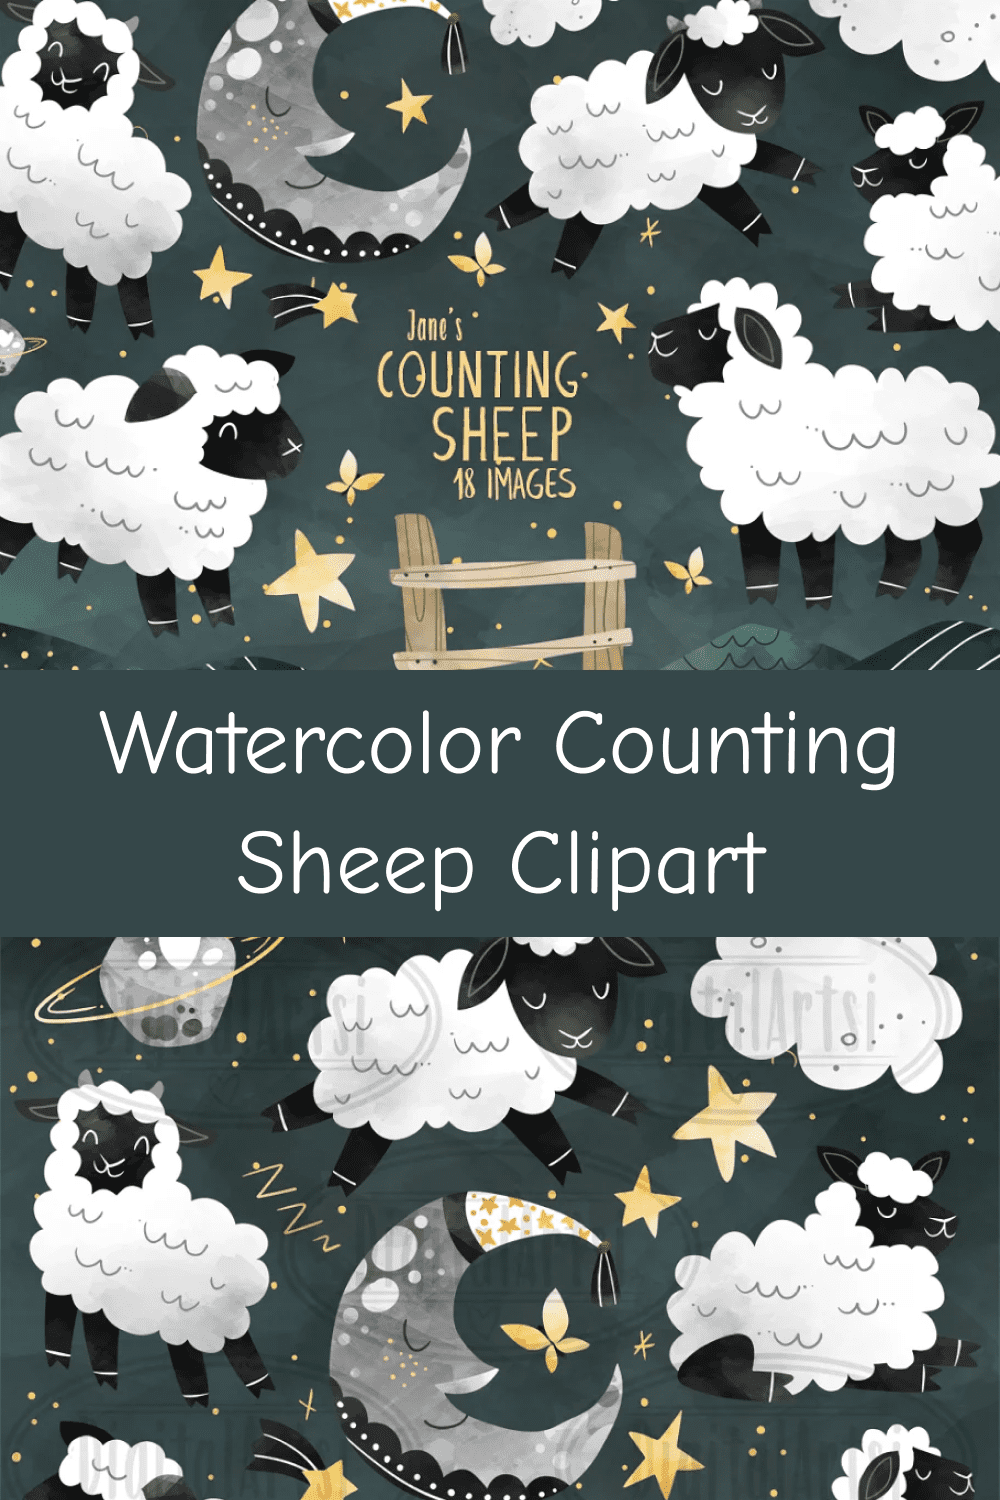 Watercolor Counting Sheep Clipart.